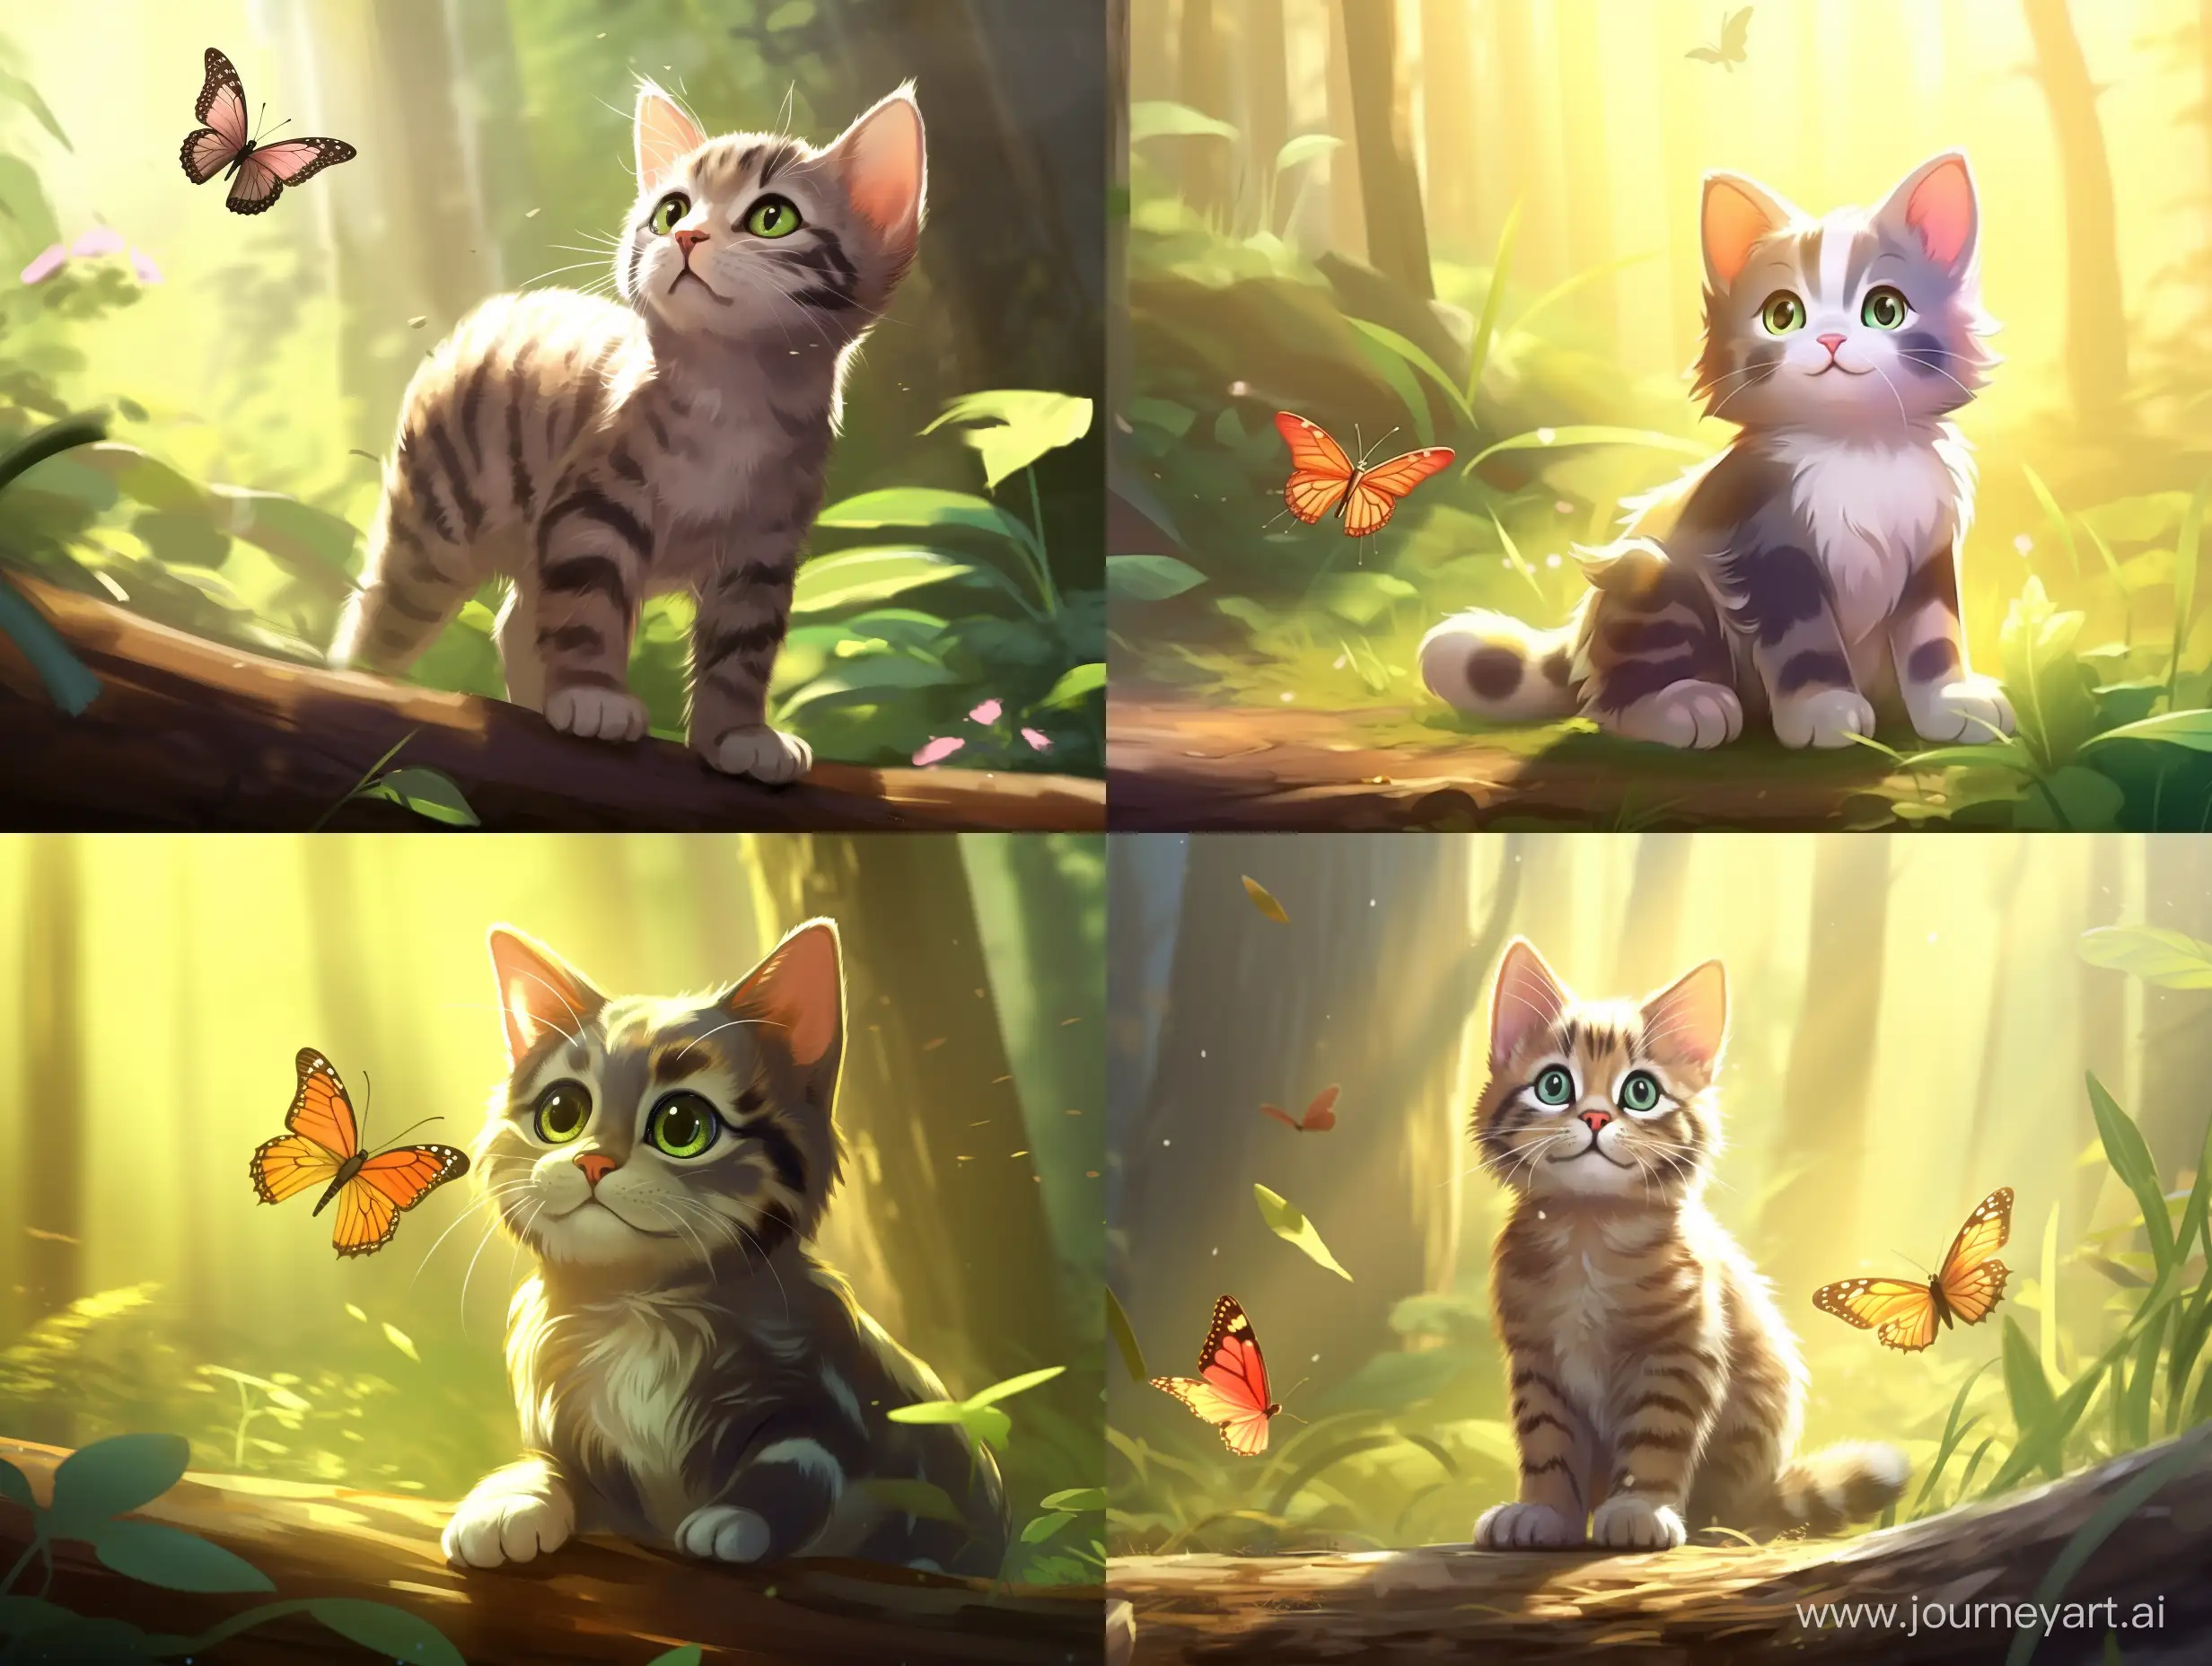 Adorable-Kitten-and-Cat-Frolicking-in-AnimeInspired-Morning-Forest